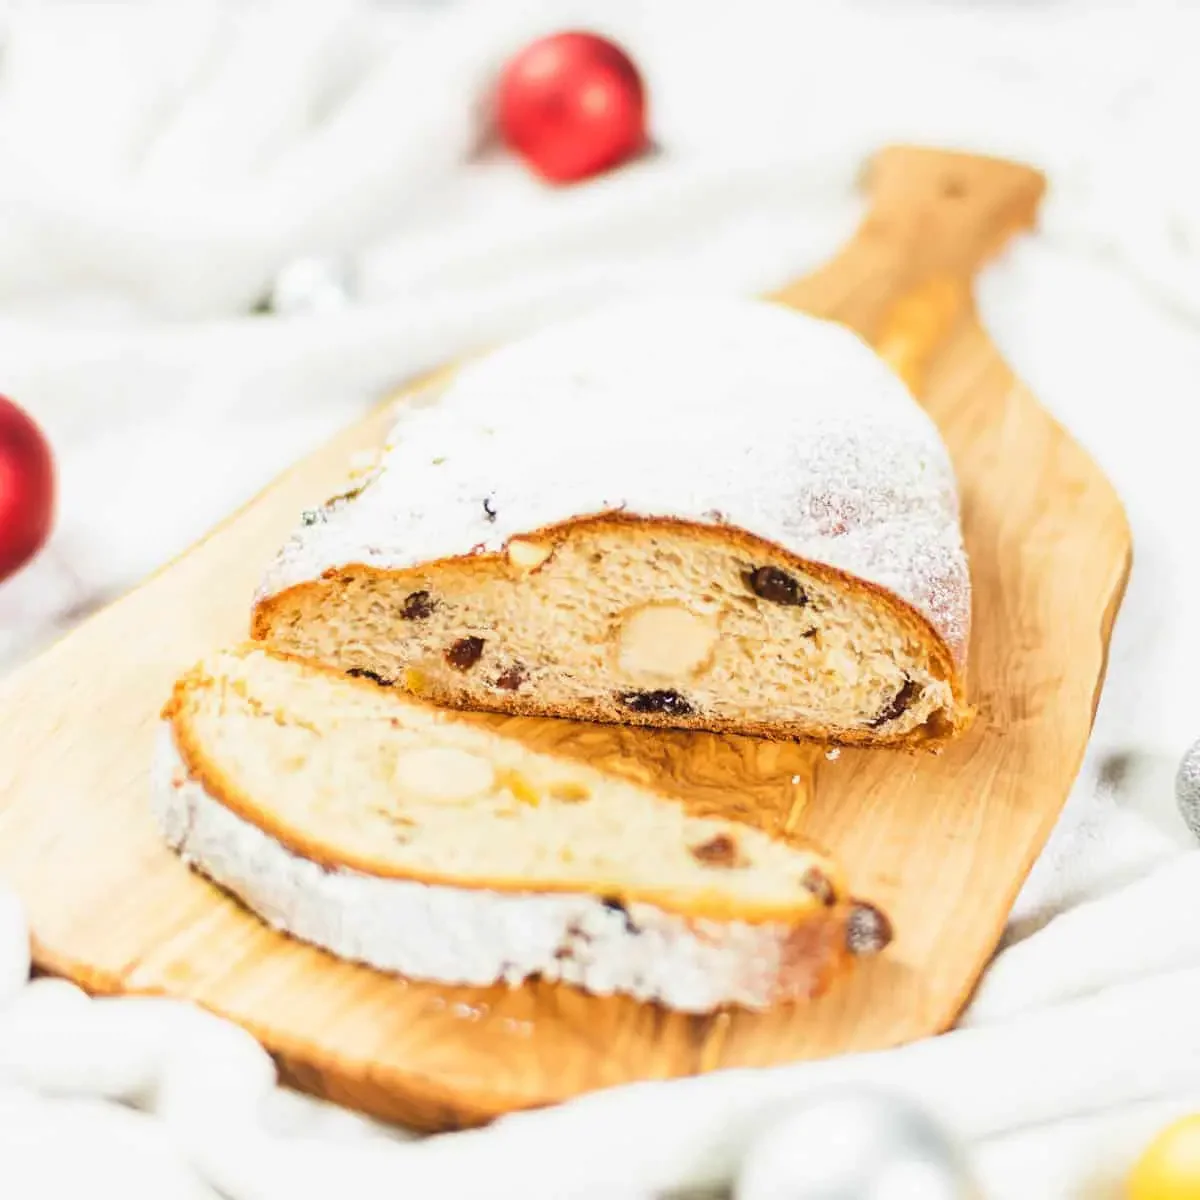 Authentic Stollen Recipe to Make for Christmas